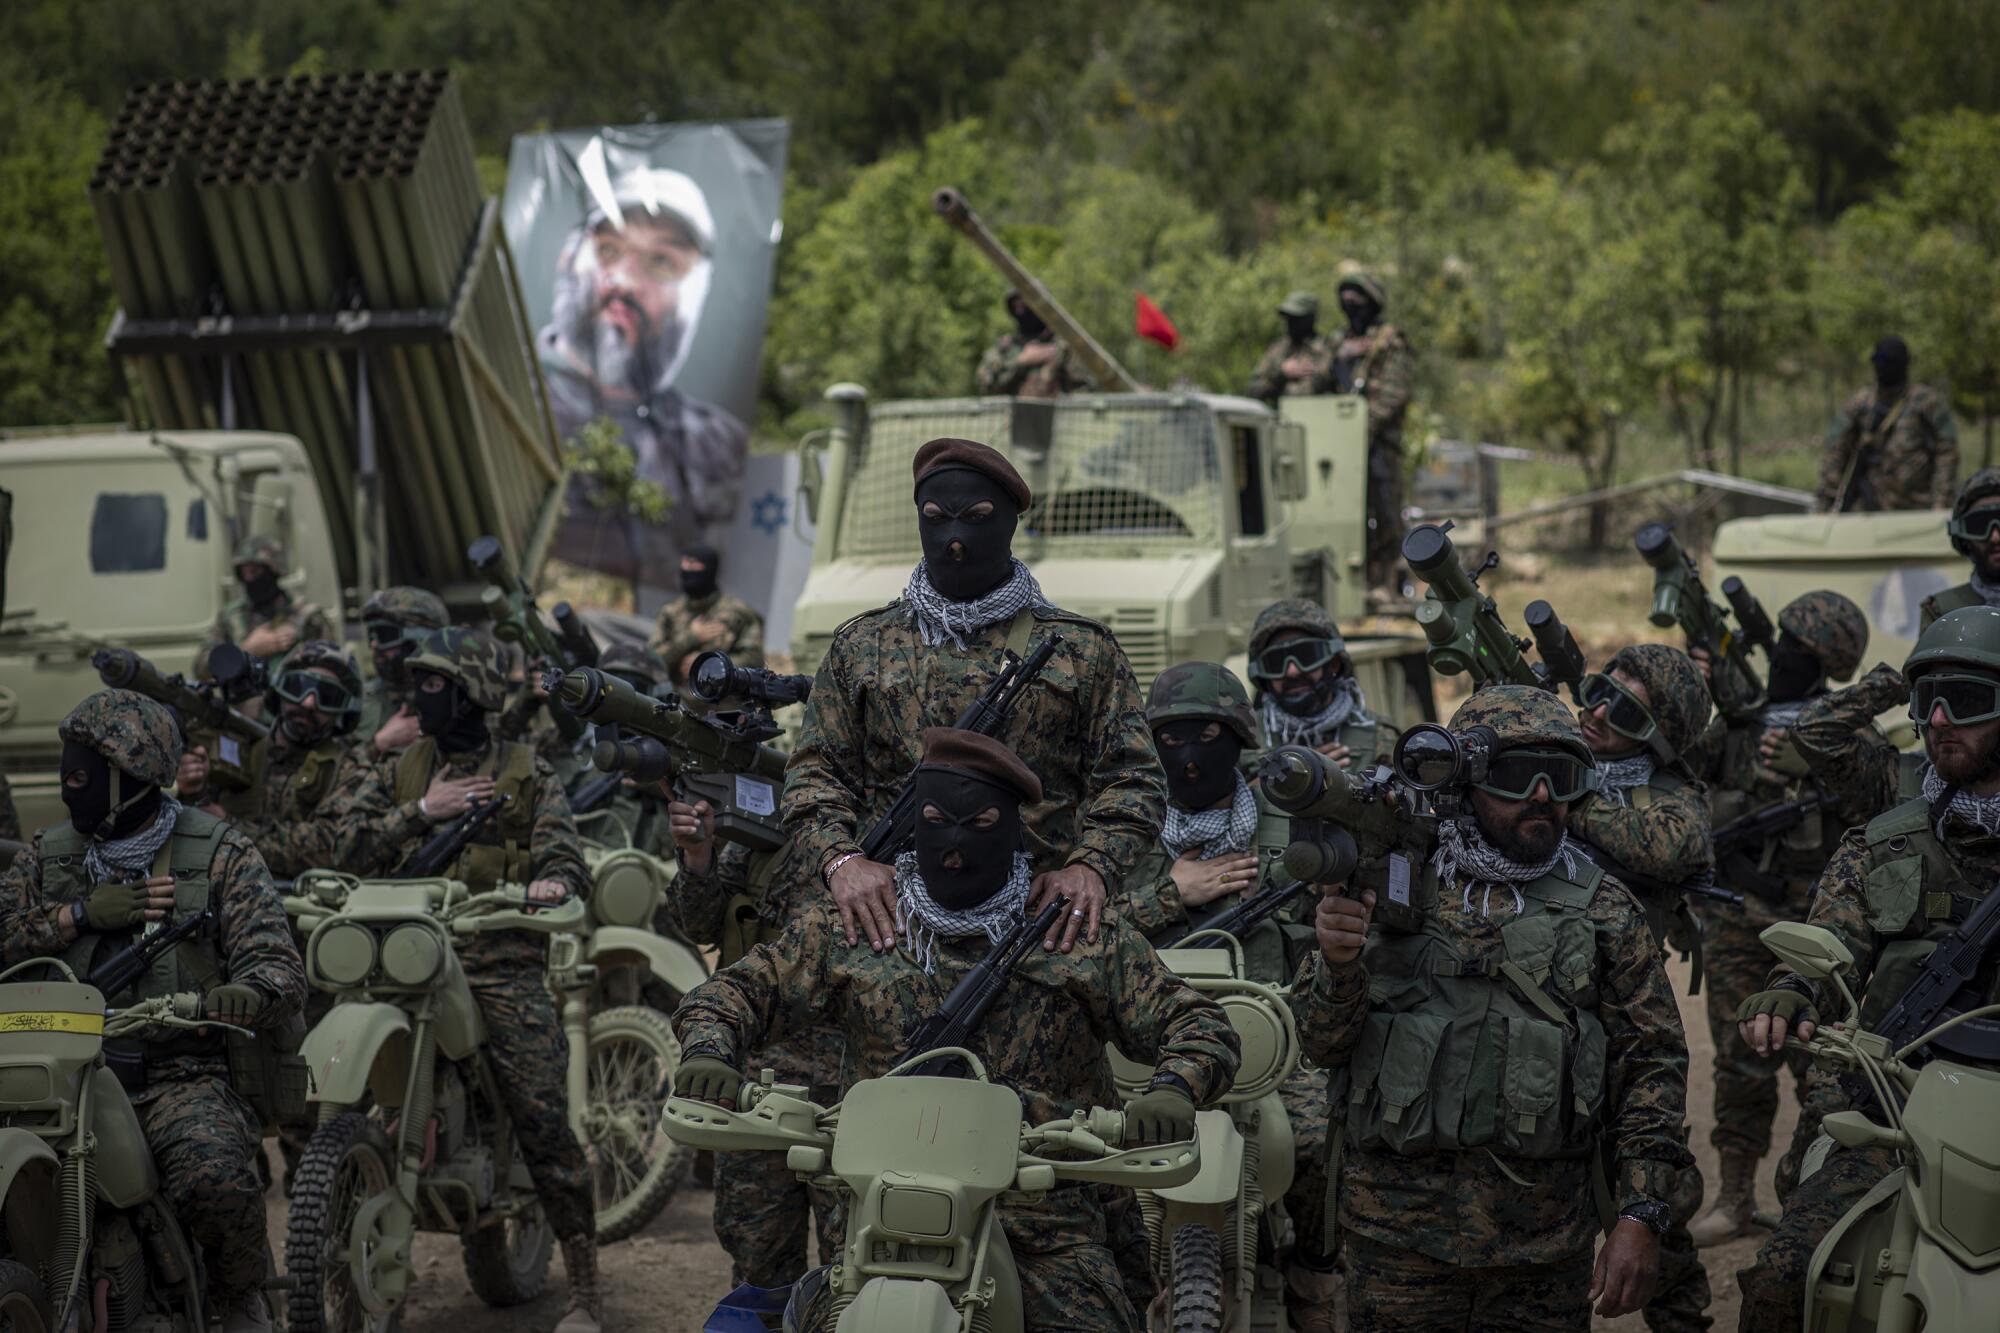 Hezbollah fighters hold a training exercise with weapons and vehicles.